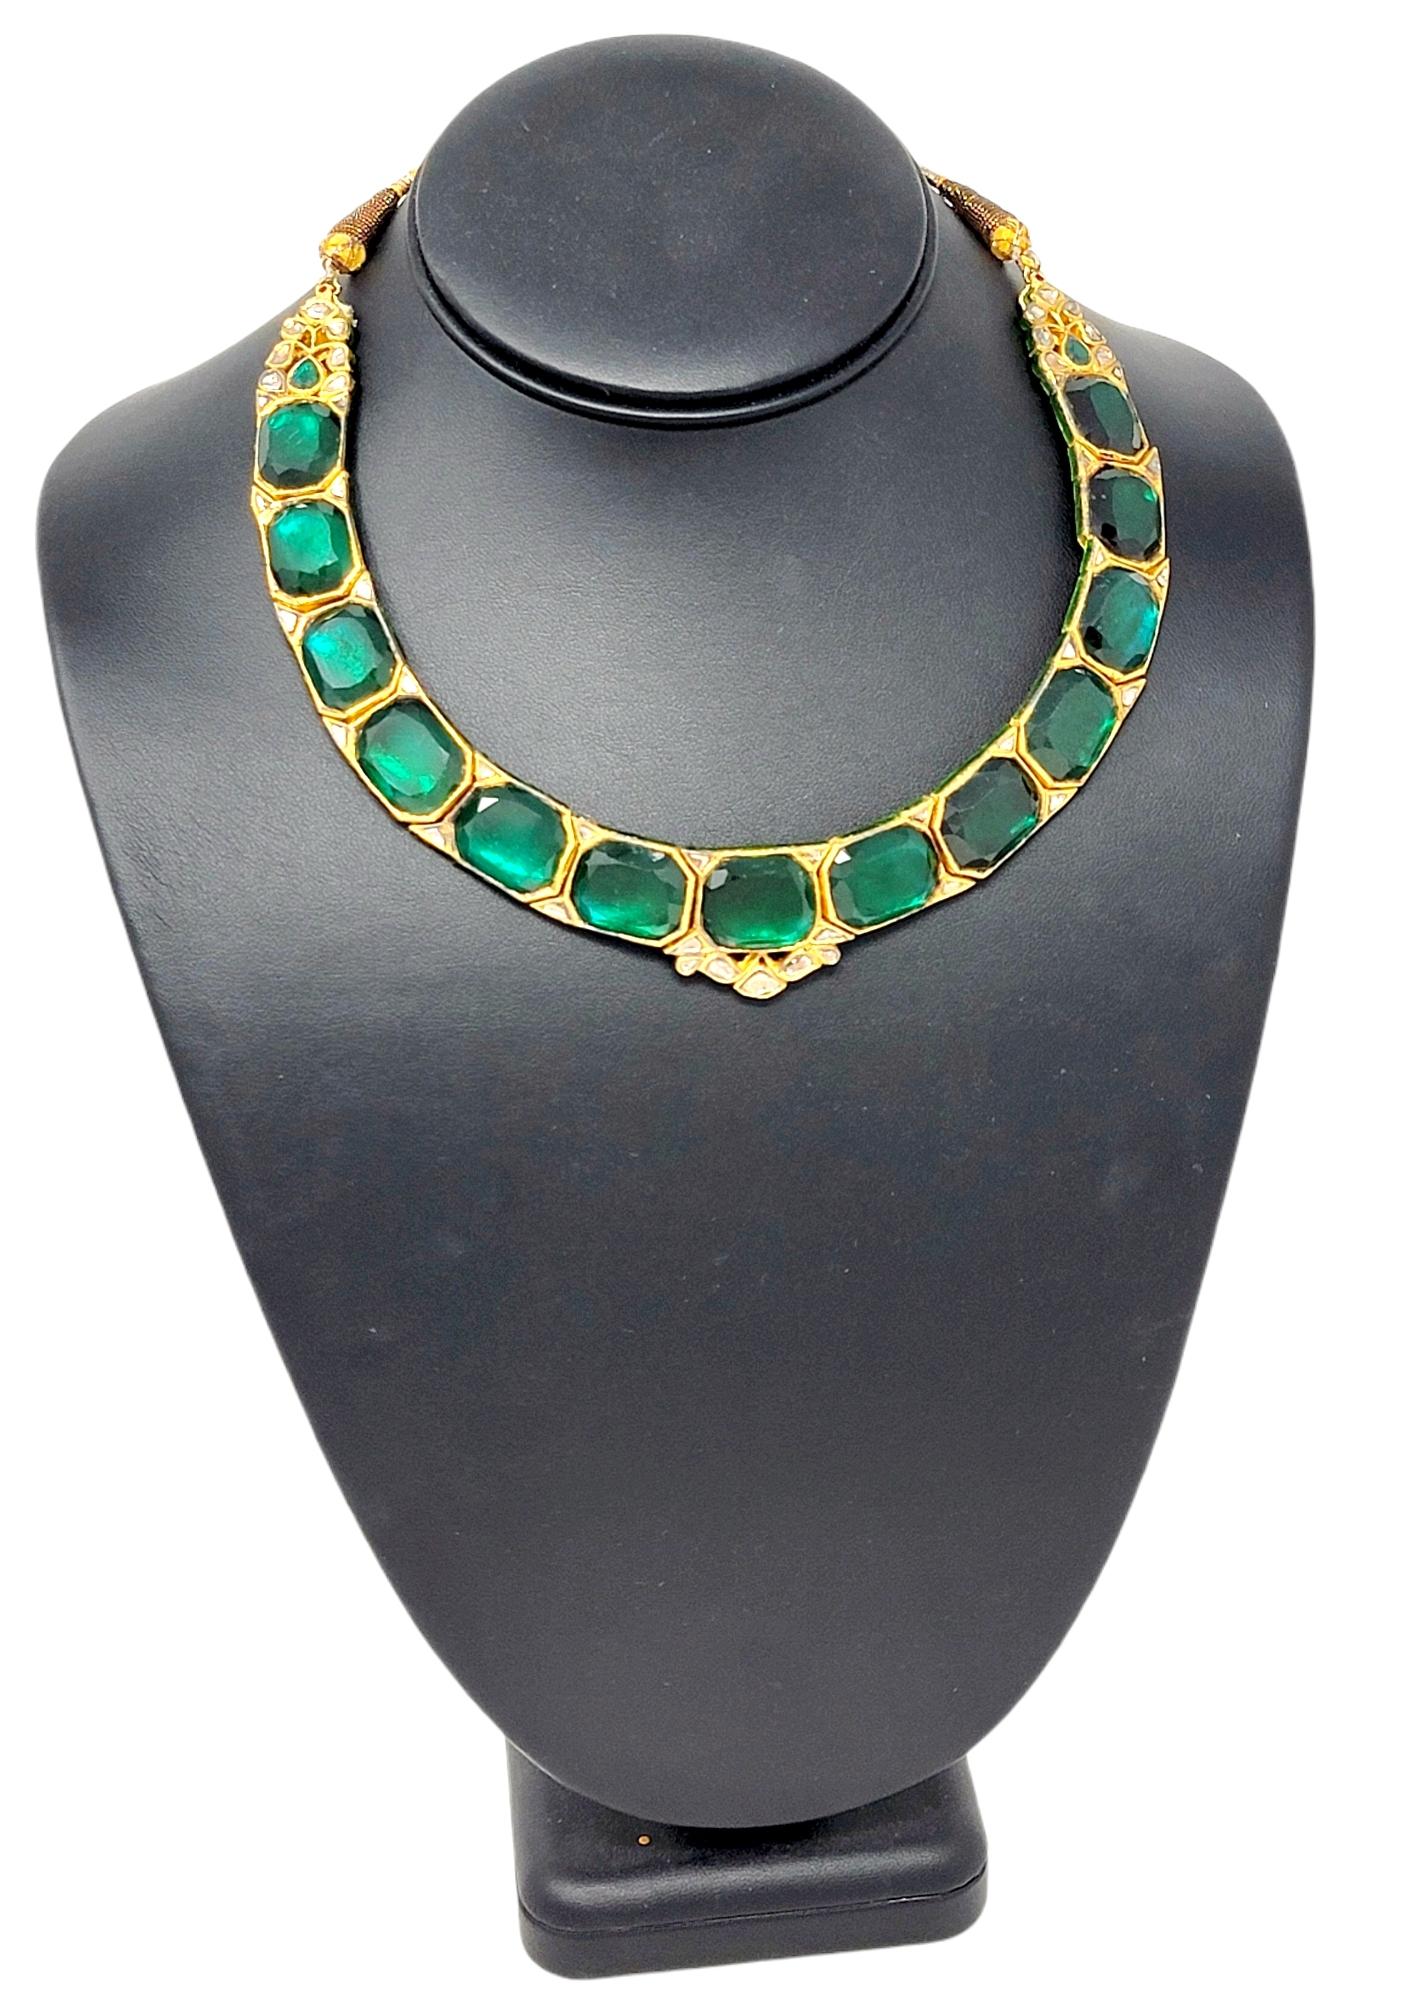 This gorgeous, one-of-a-kind Polki necklace is absolutely stunning. The bold color and size of the rich green glass stones really makes a statement, while the natural diamonds add an extra touch of sparkle. This incredible necklace features 13